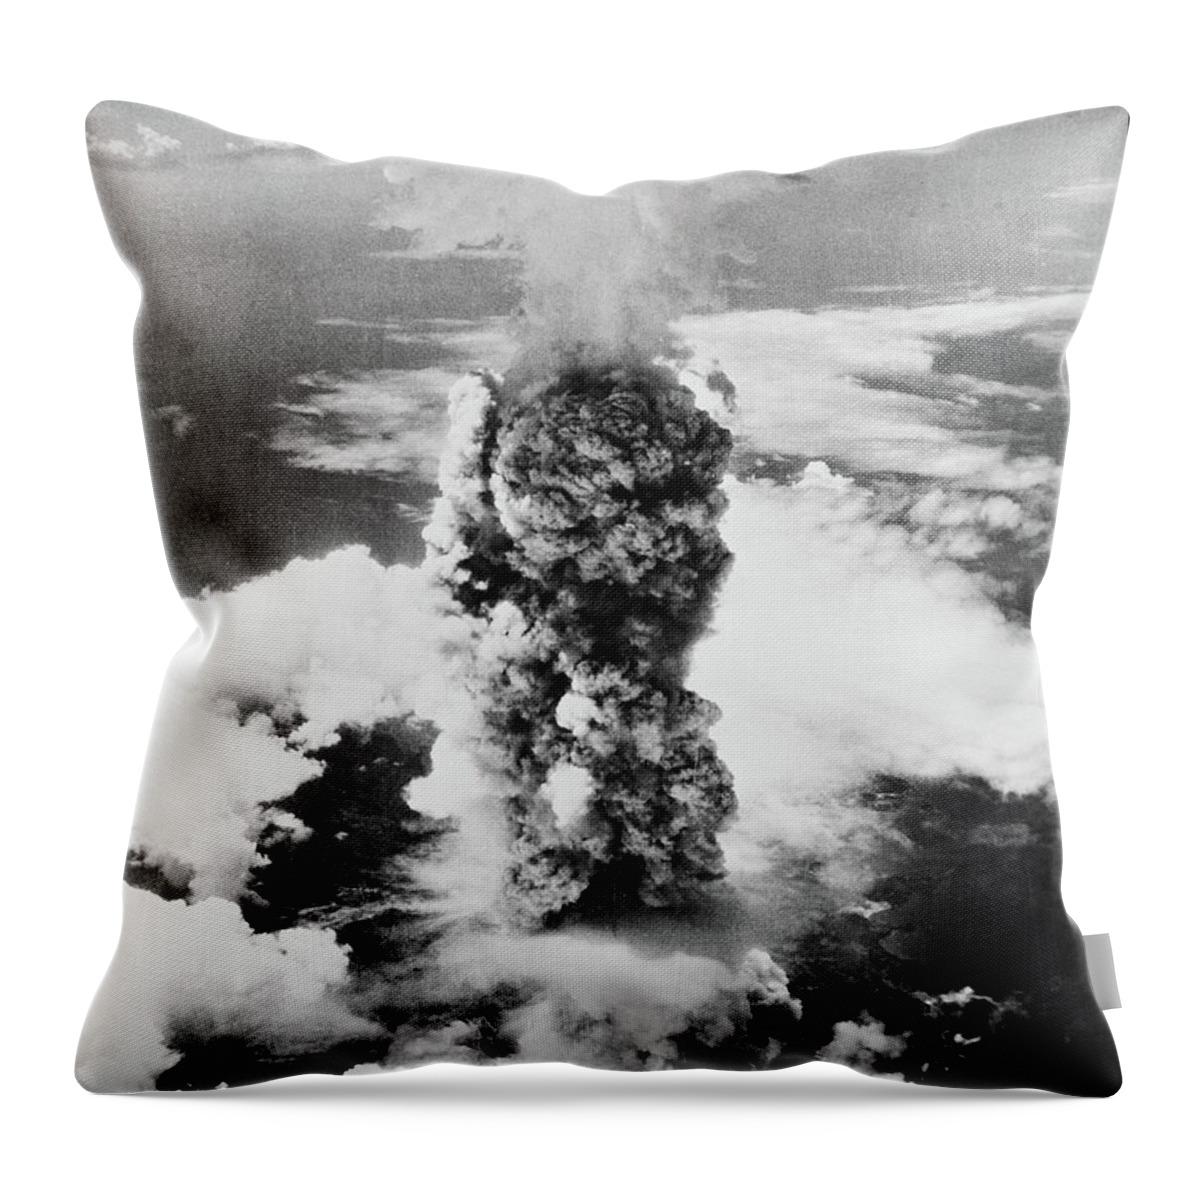 Mushroom Cloud Throw Pillow featuring the painting Atomic Bomb, Hiroshima, Giant Mushroom cloud, 1945 by United States Army